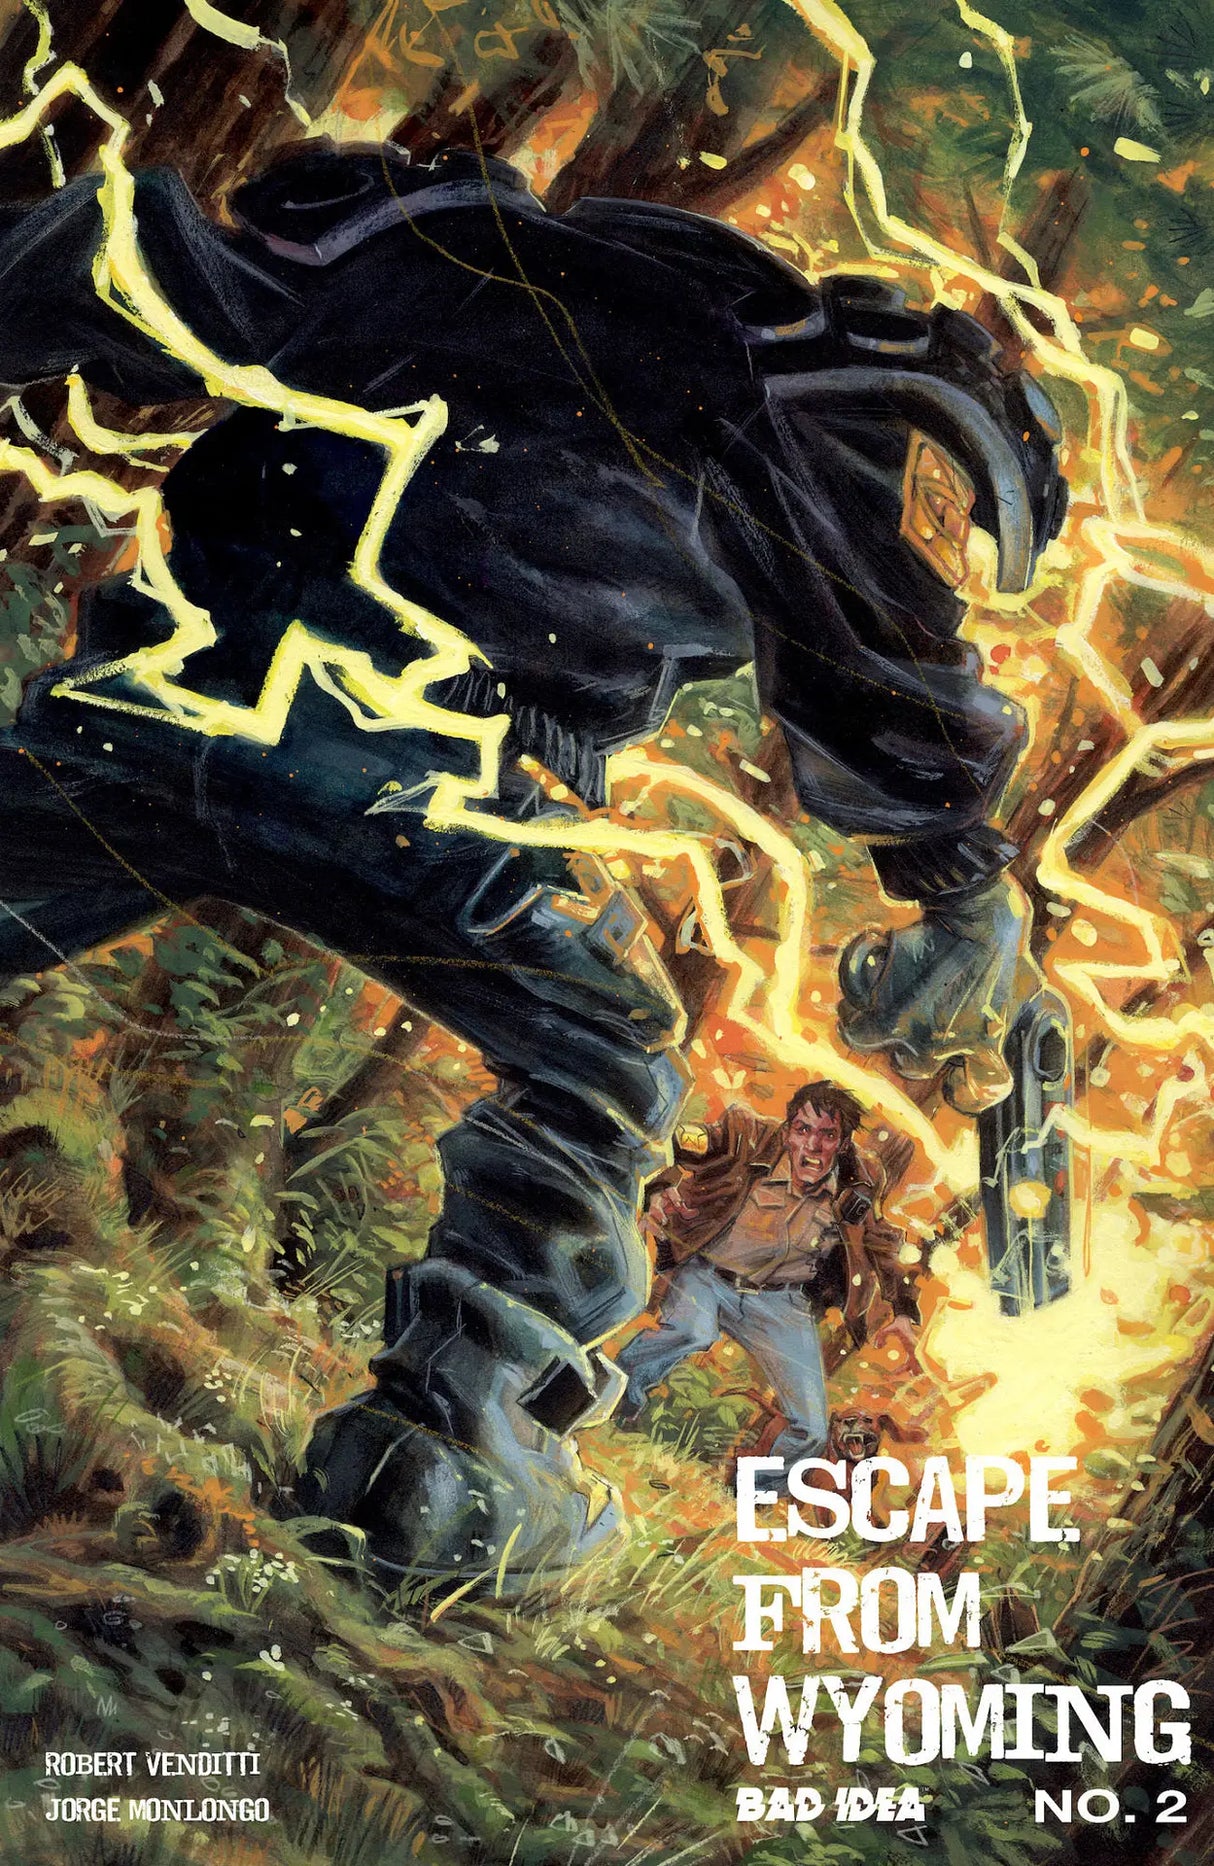 ESCAPE FROM WYOMING #2 NOT FIRST PRINT